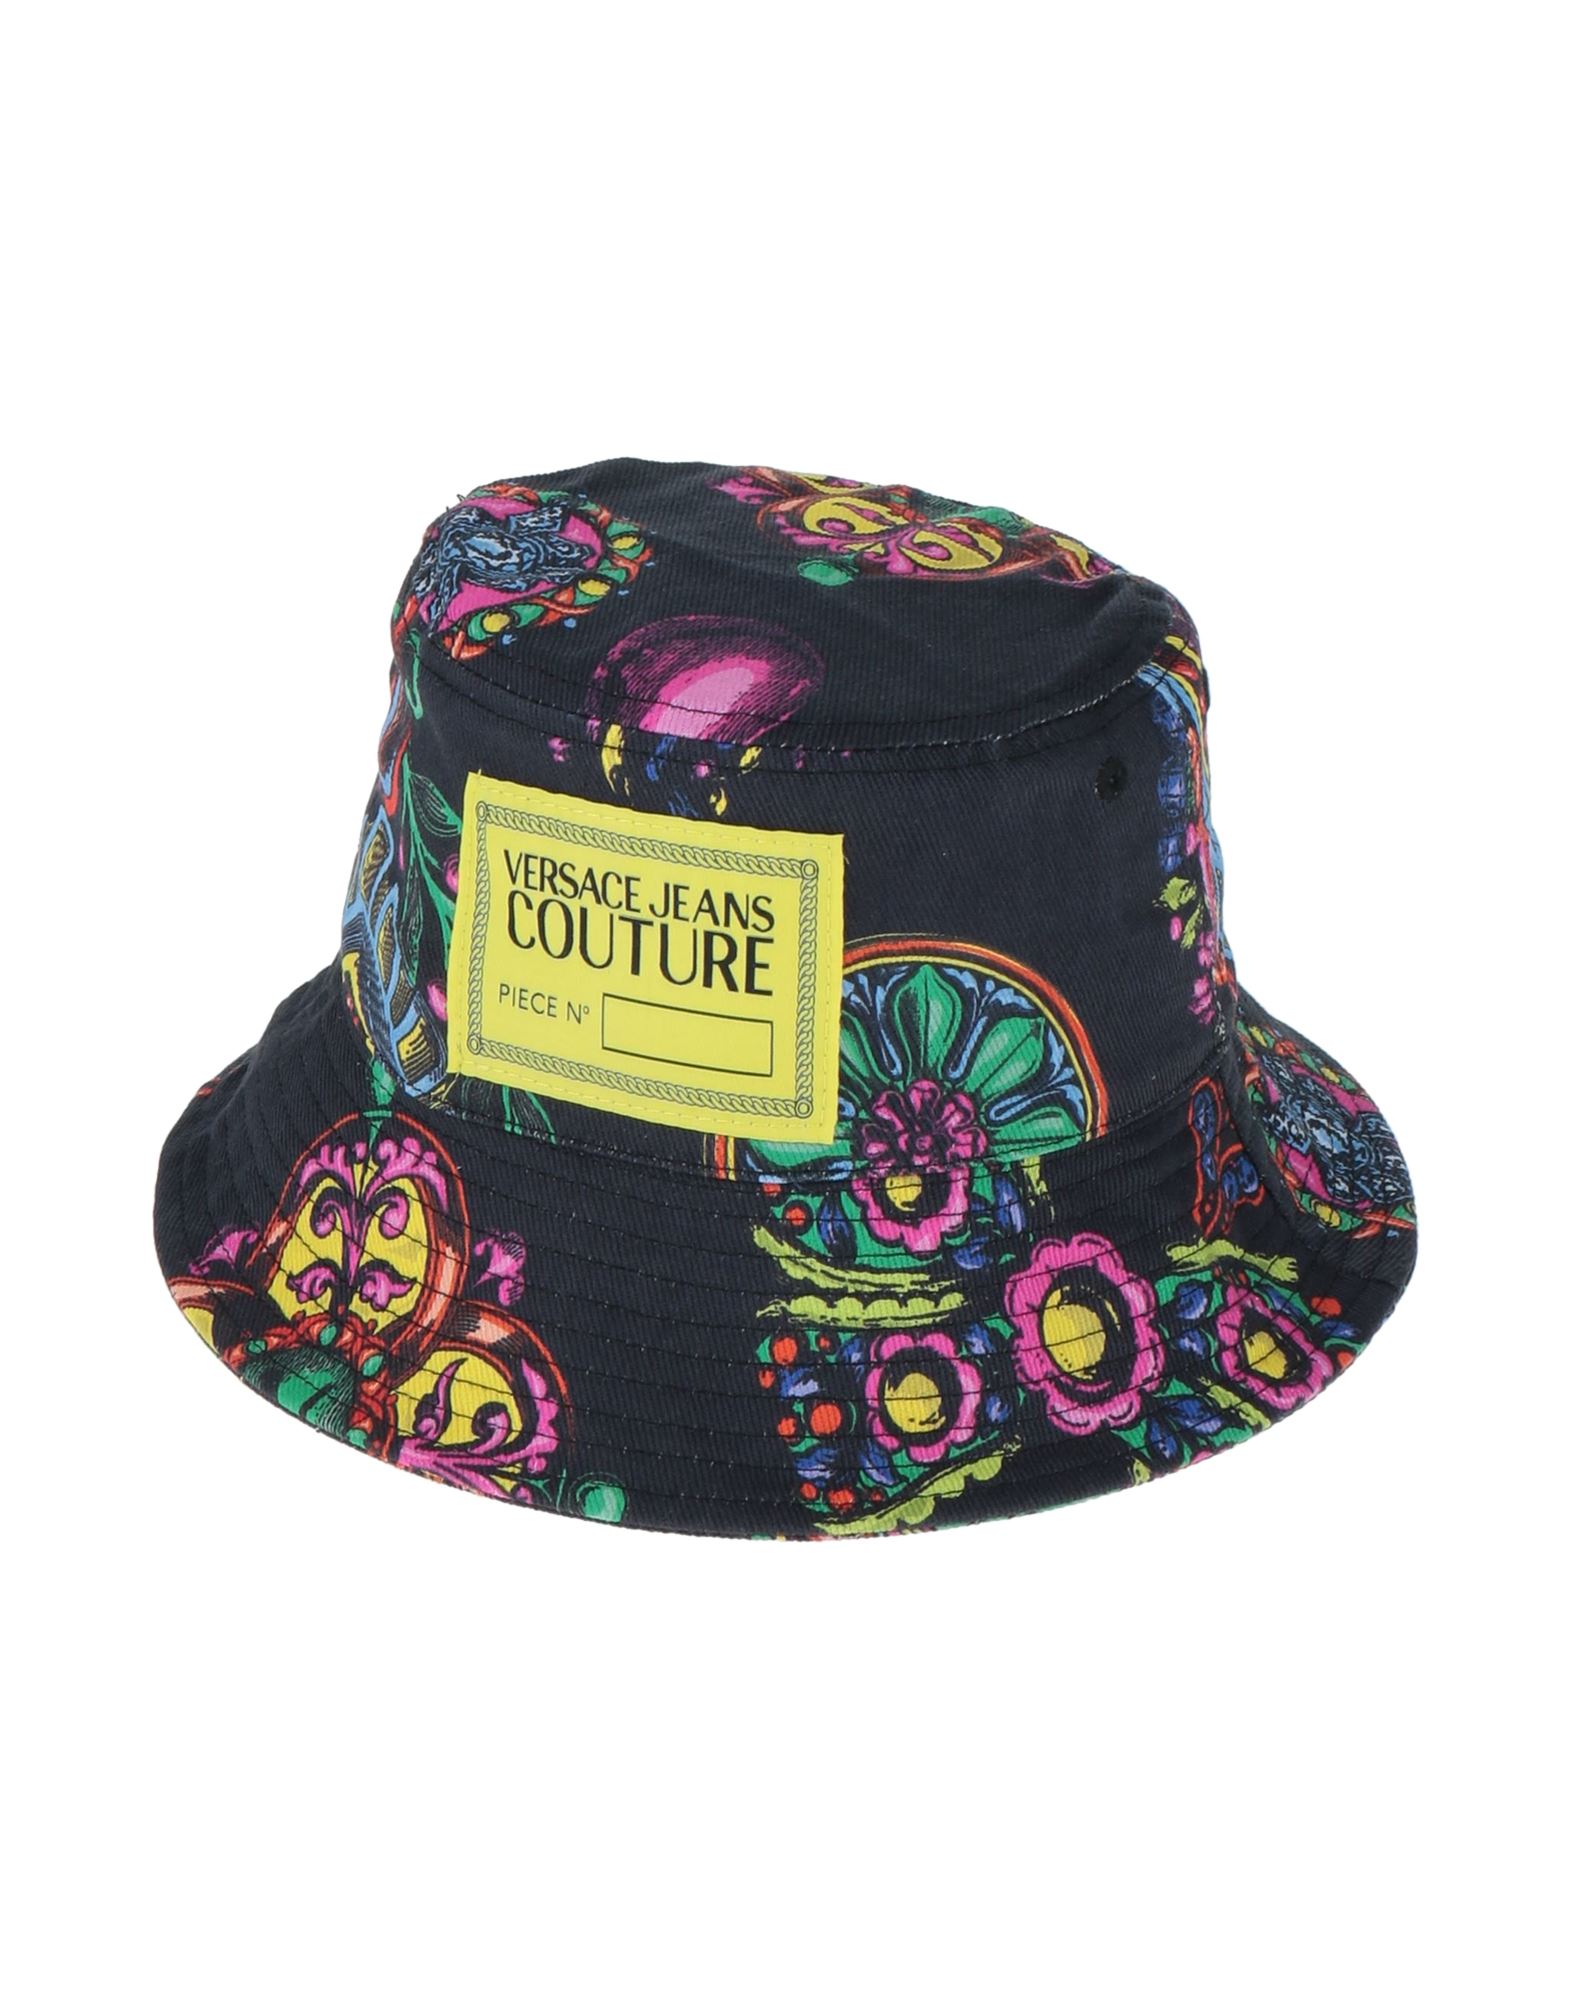 VERSACE JEANS COUTURE Hats